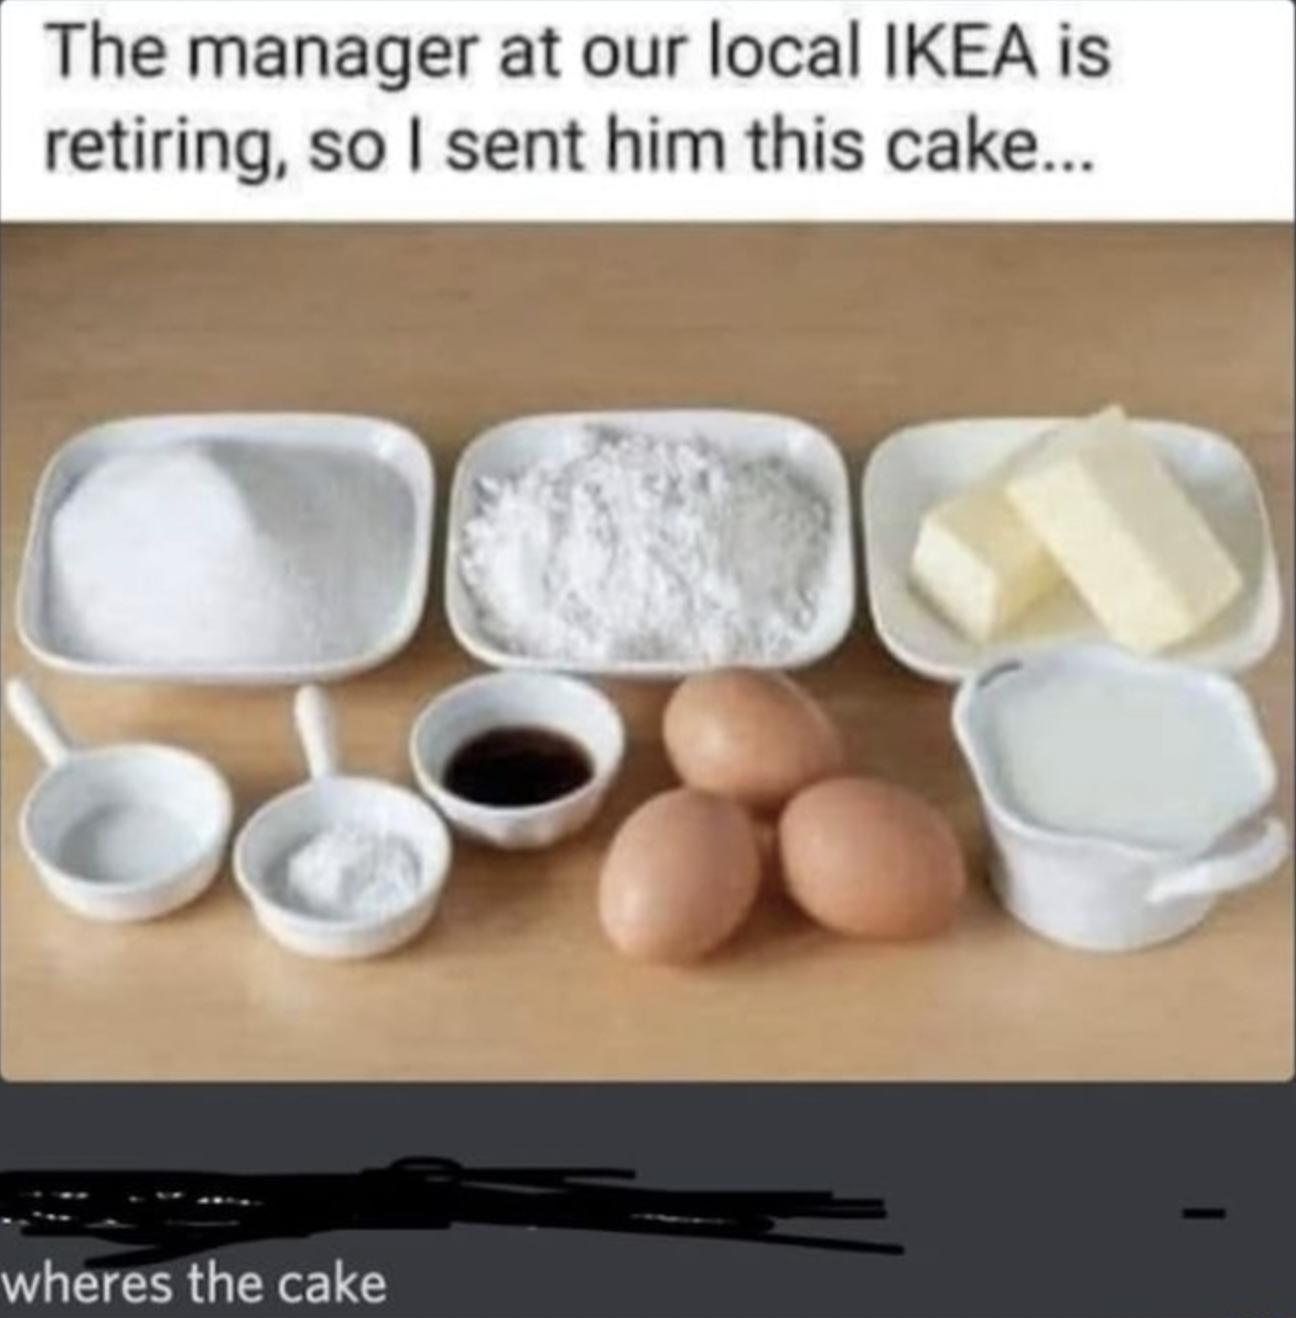 People Who Don't Get the Joke - manager at ikea is retiring - The manager at our local Ikea is retiring, so I sent him this cake... wheres the cake I